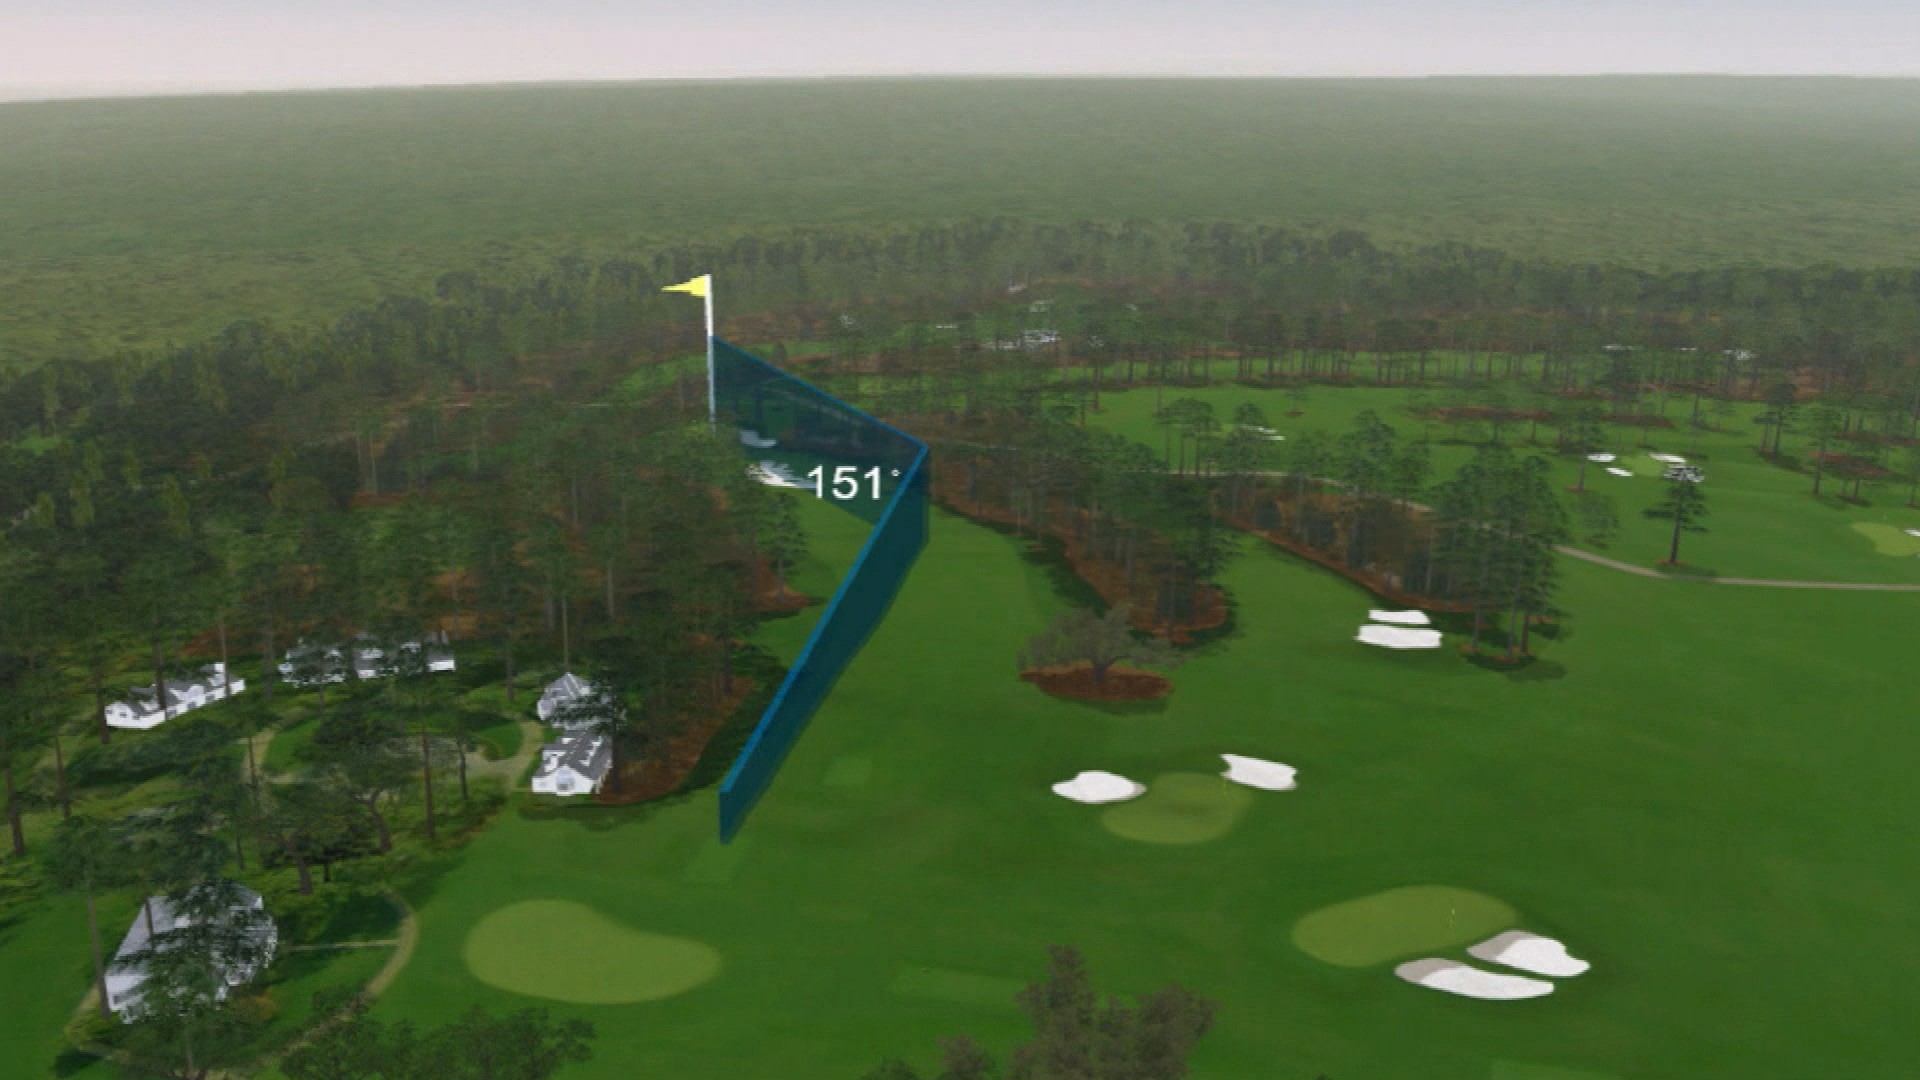 1920x1080 Does Augusta National's layout favor lefties?Apr 08, 2014